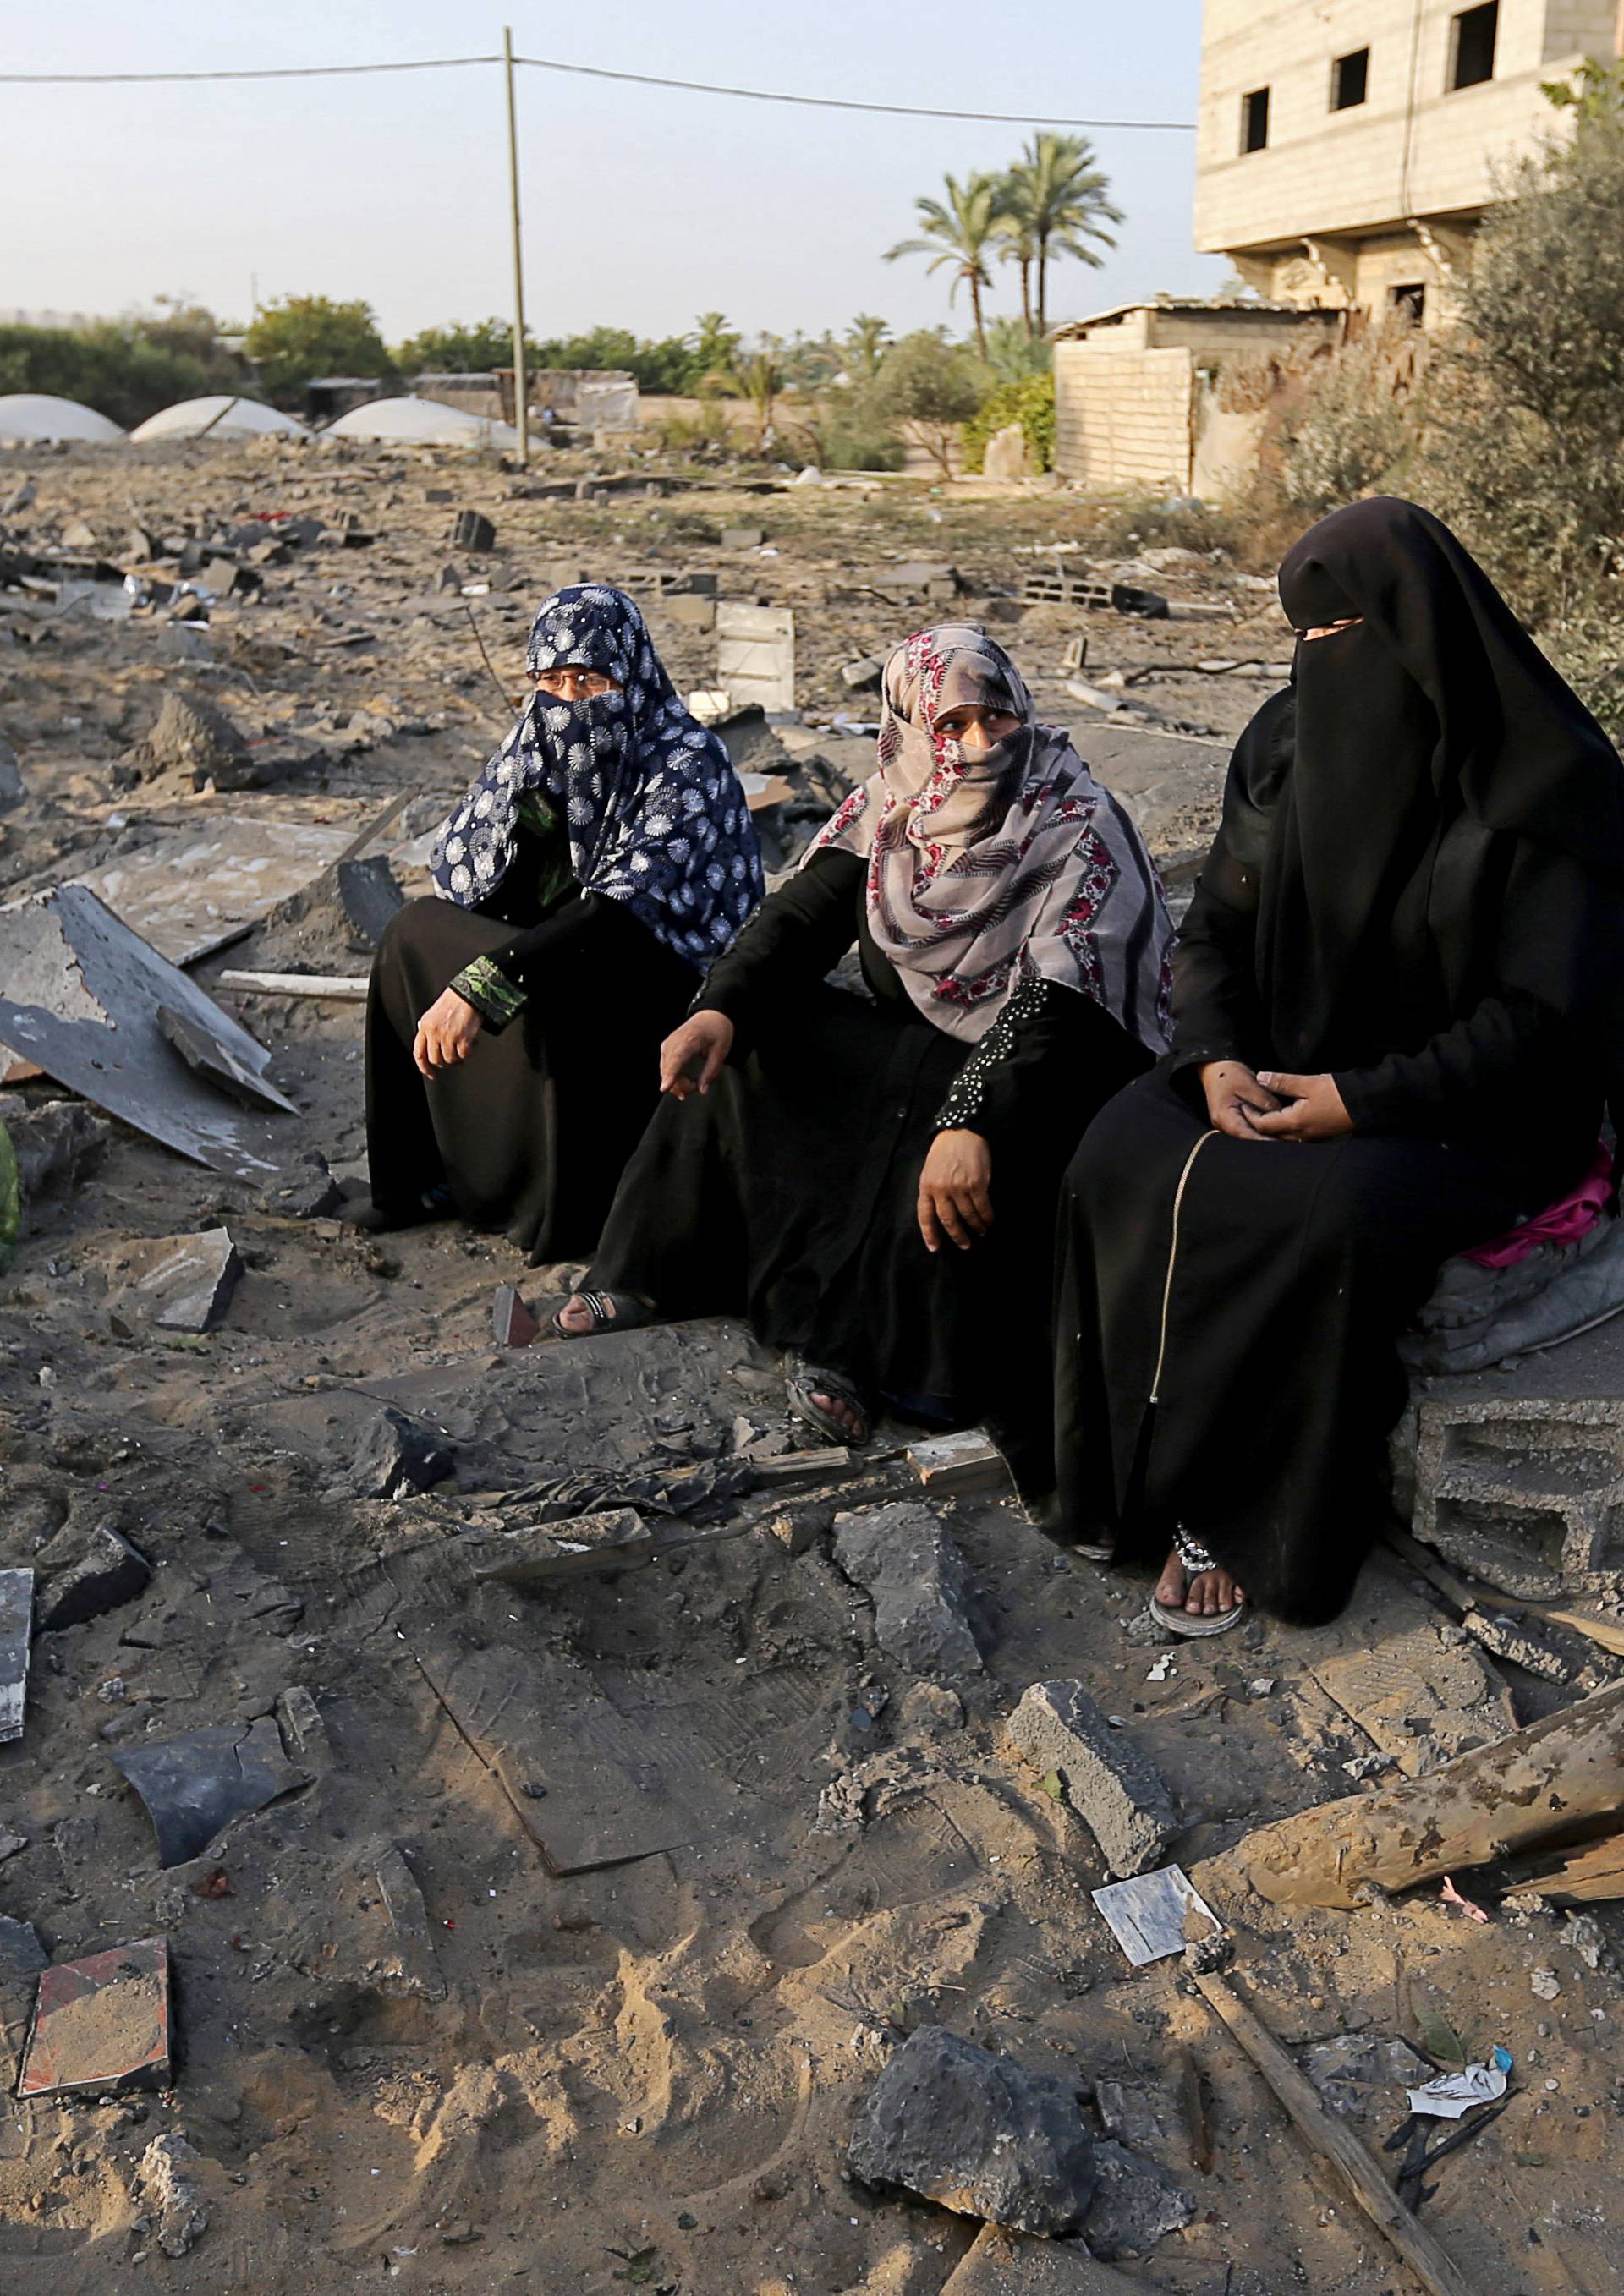 Palestinian women sit near the remains of a house destroyed in an Israeli air strike in the southern Gaza Strip